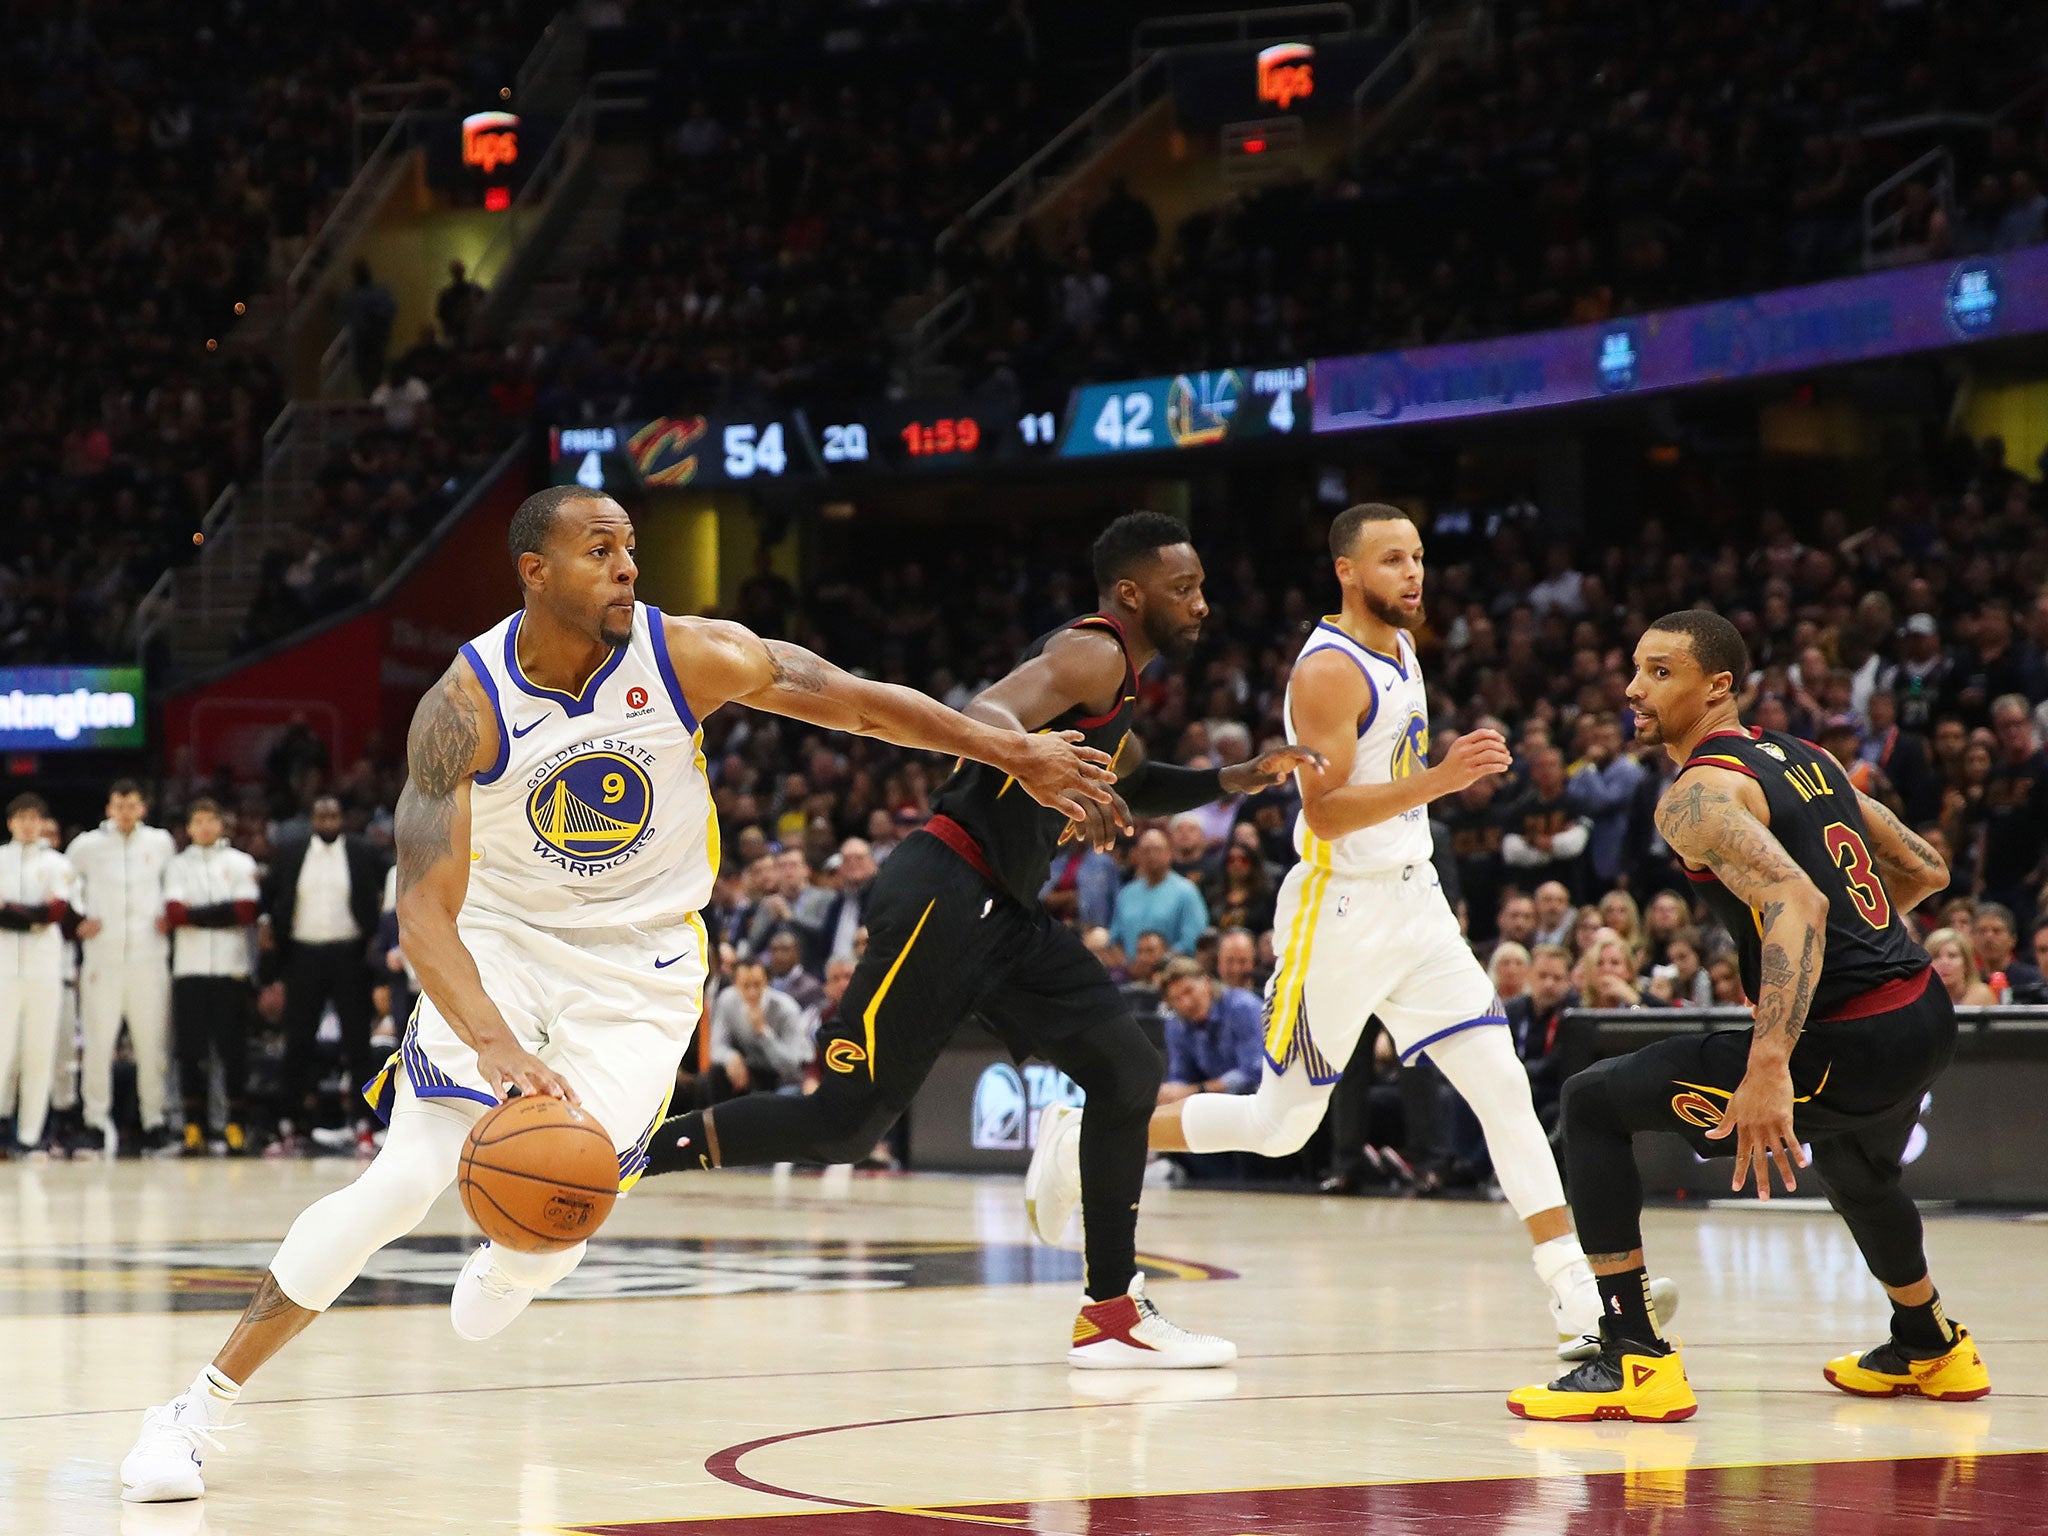 The Warriors and Cavaliers are midway through the NBA's championship finals